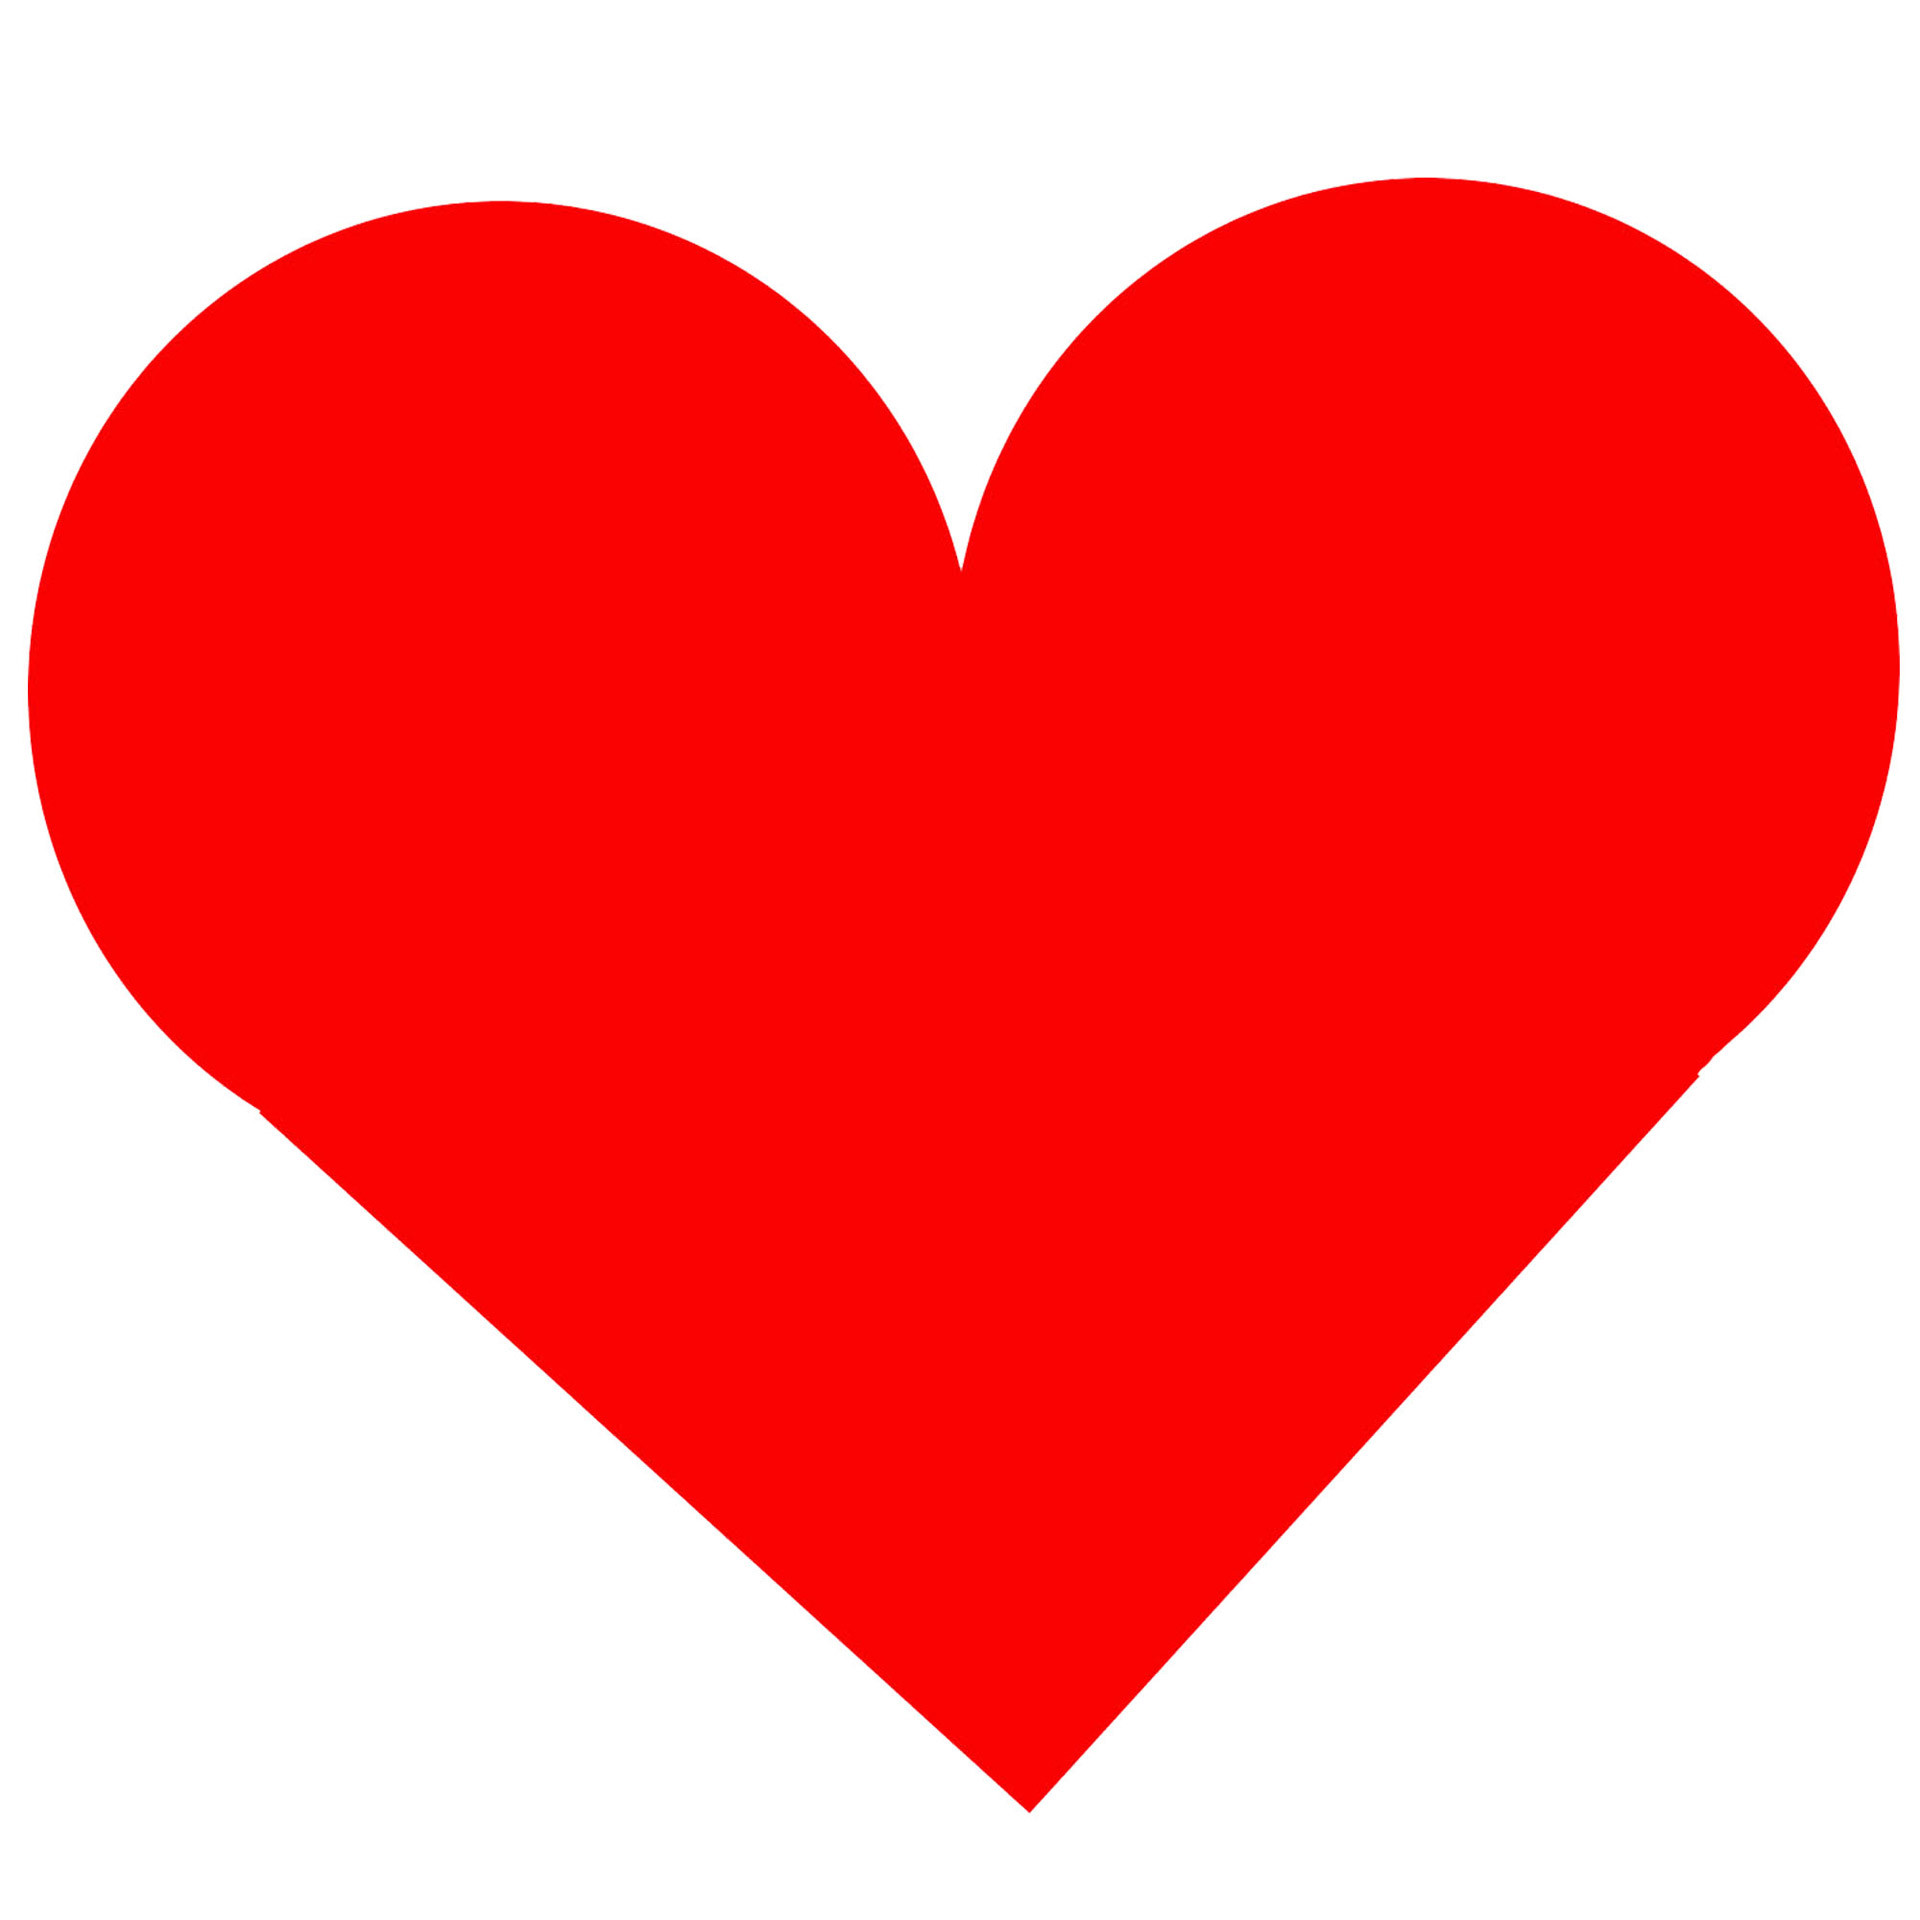 1920x1920 Download Picture Of A Fantastic Hd Red Heart Wallpaper For Desktop